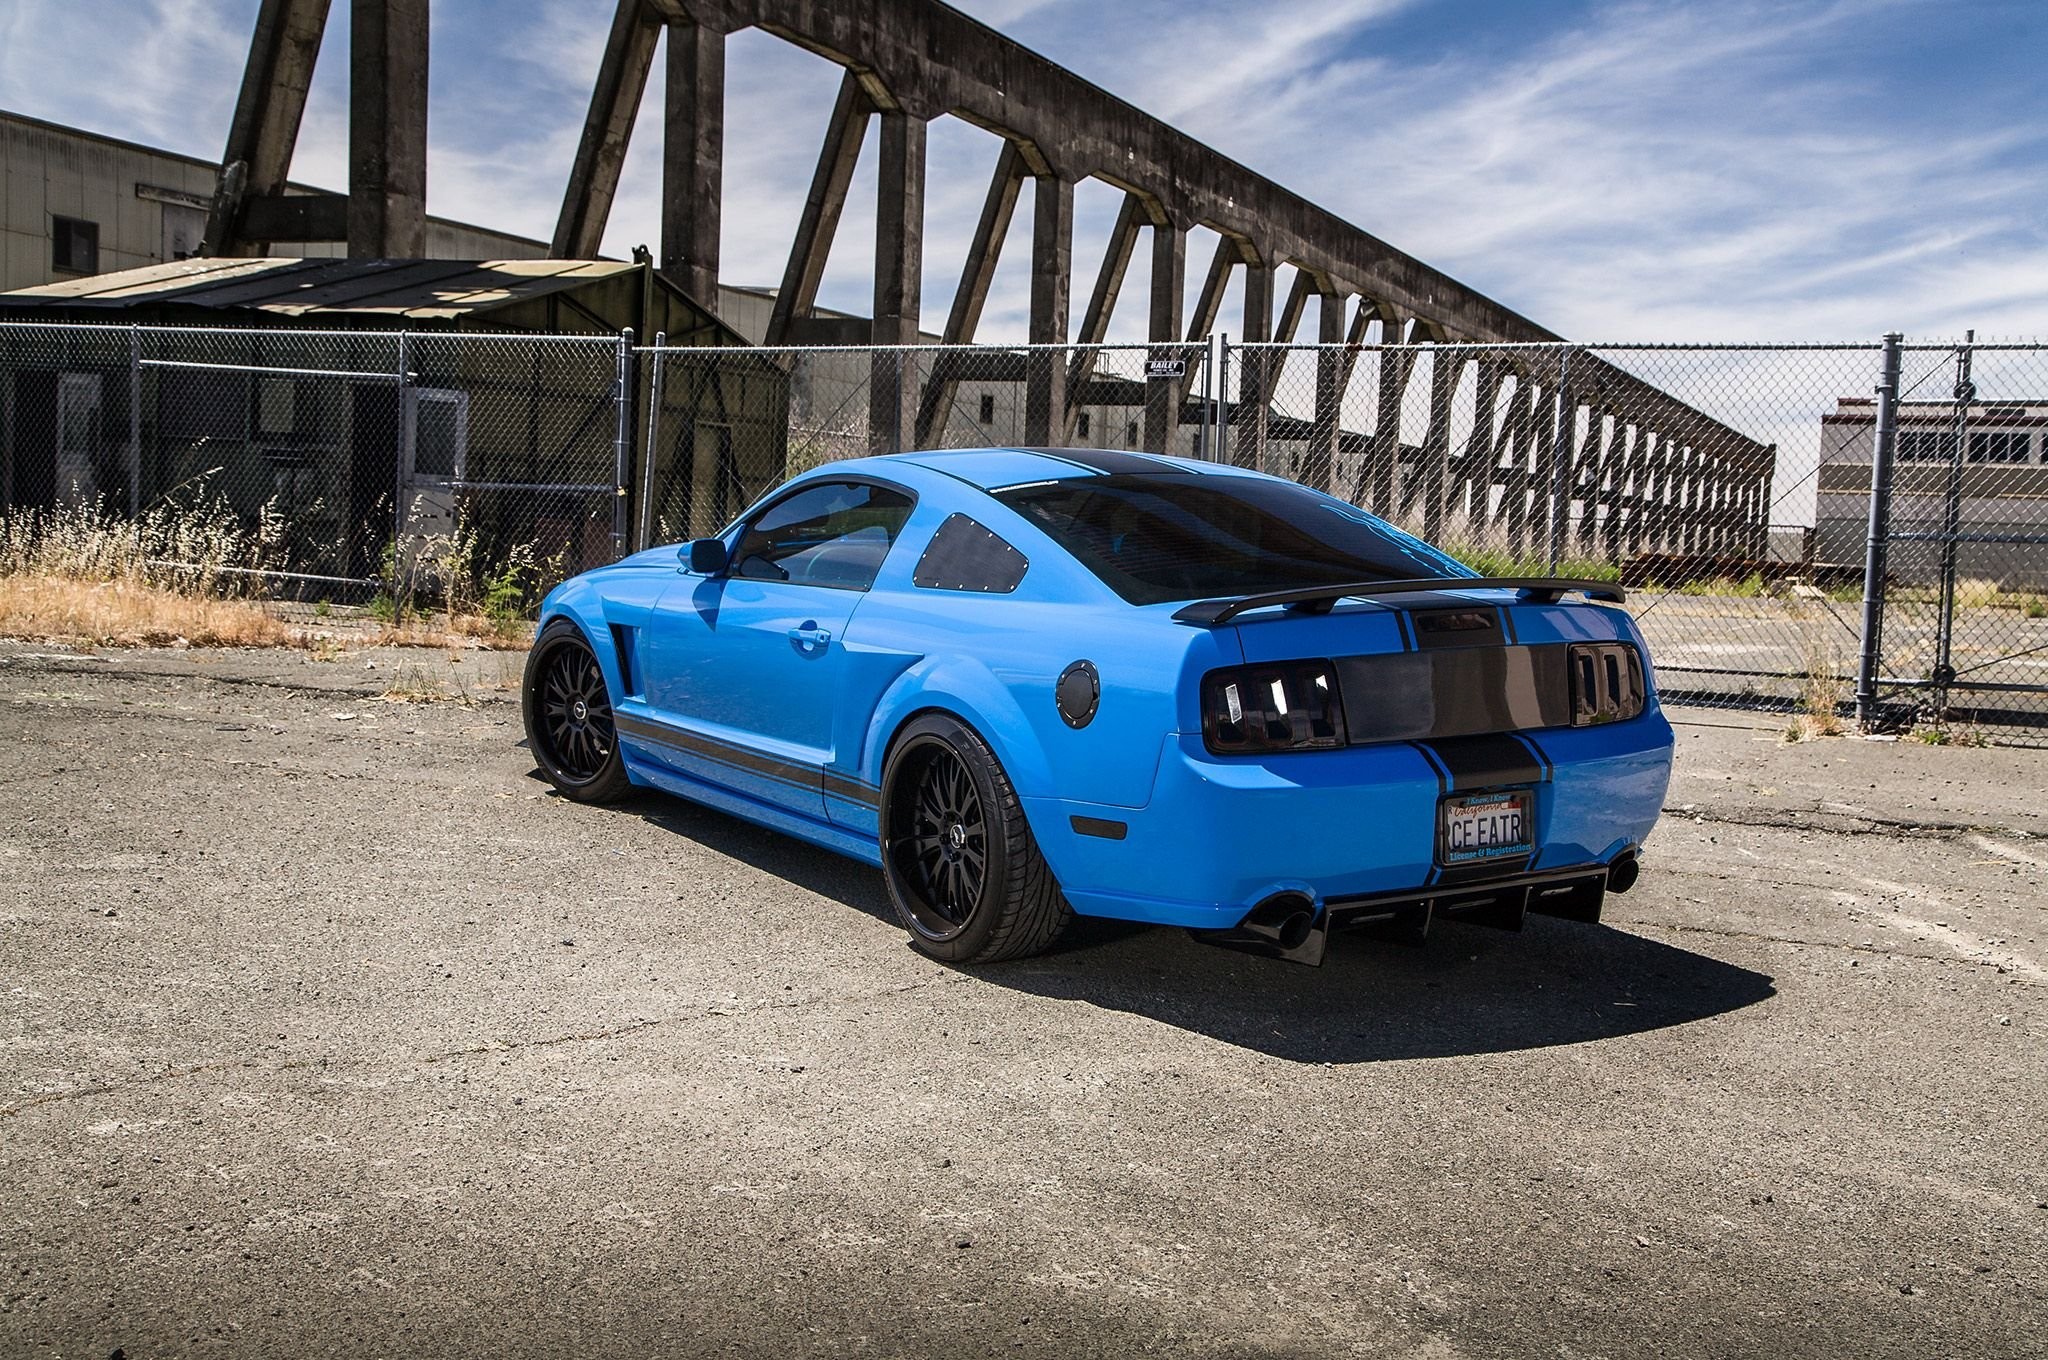 2048x1360 2005 Ford Mustang Shelby GT Super Street Pro Touring Supercar USA -05  wallpaper |  | 764181 | WallpaperUP